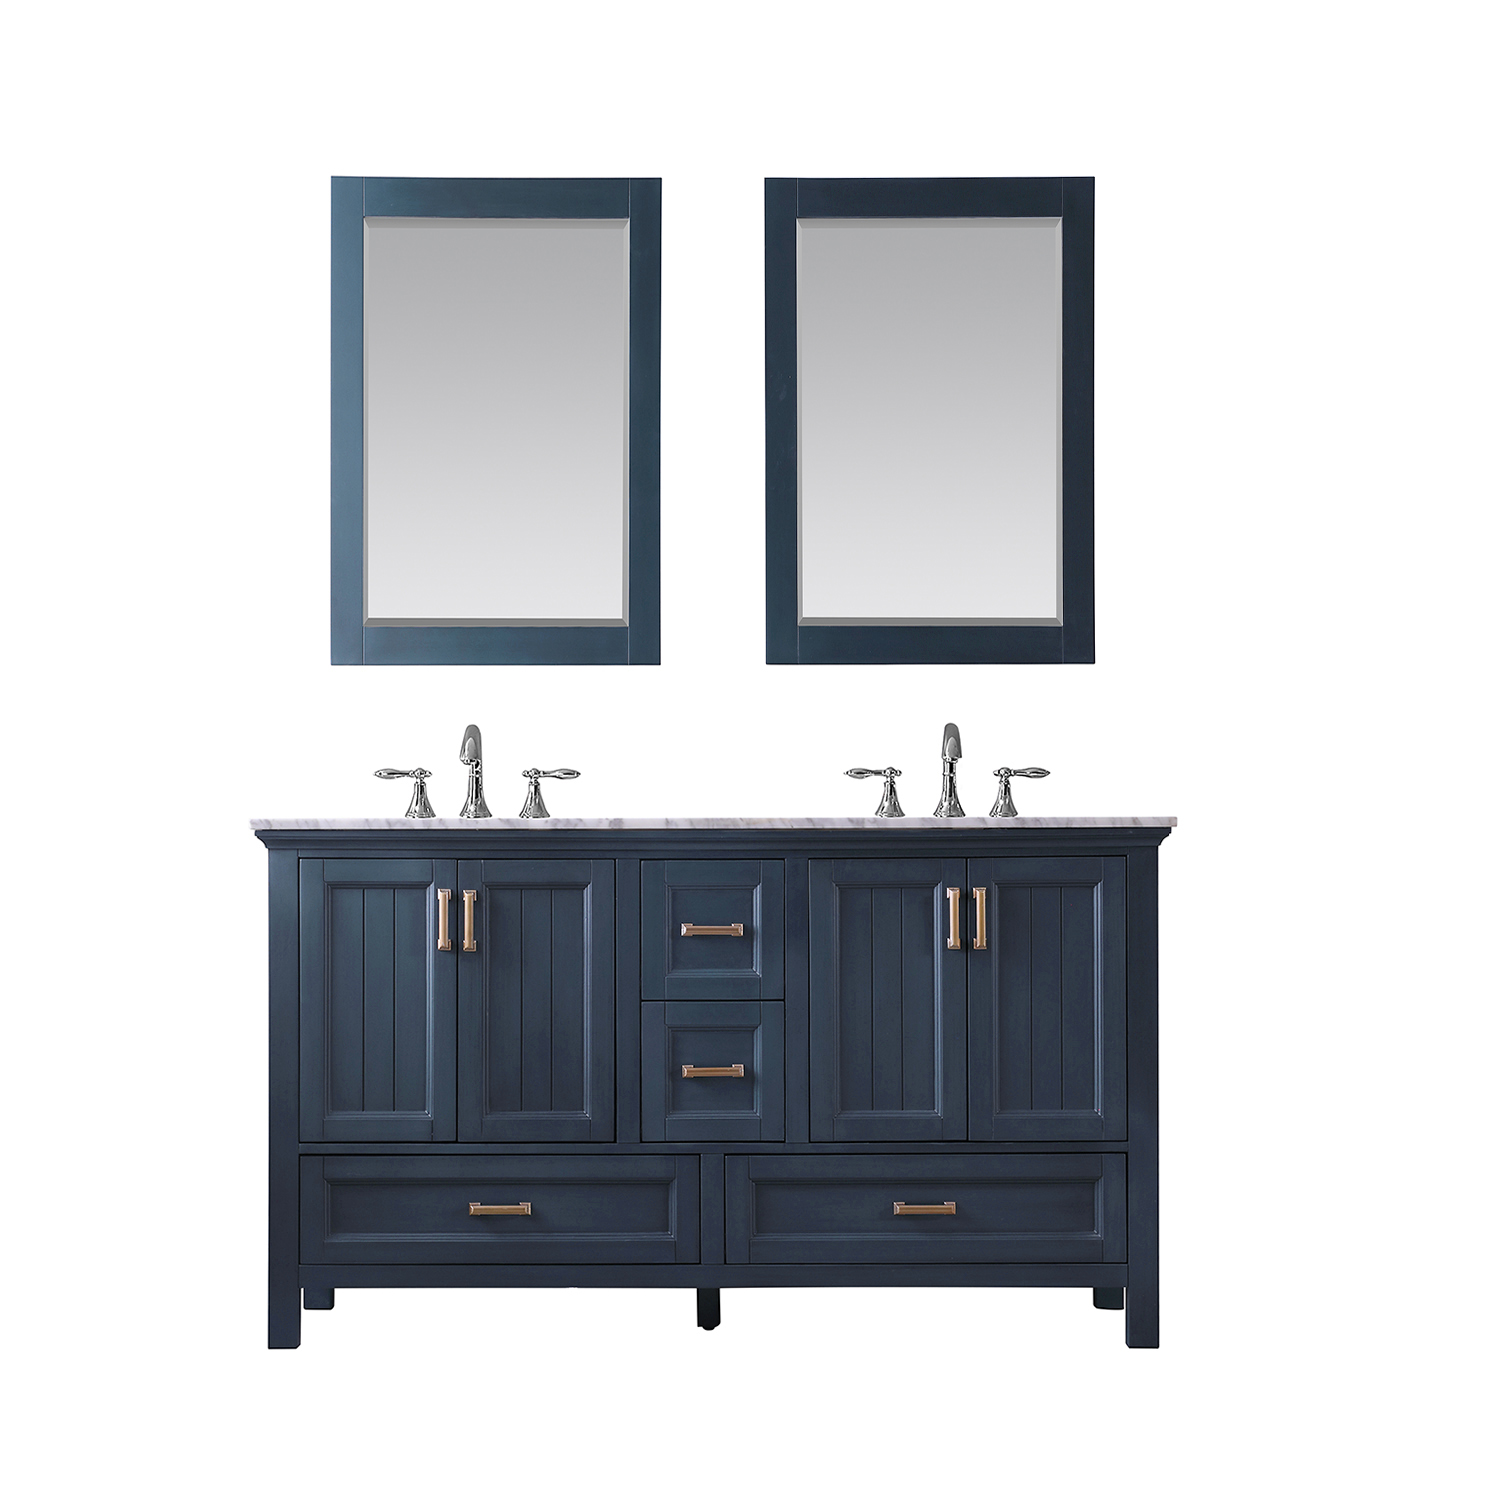 Issac Edwards Collection 60" Double Bathroom Vanity Set in Classic Blue and Carrara White Marble Countertop without Mirror  